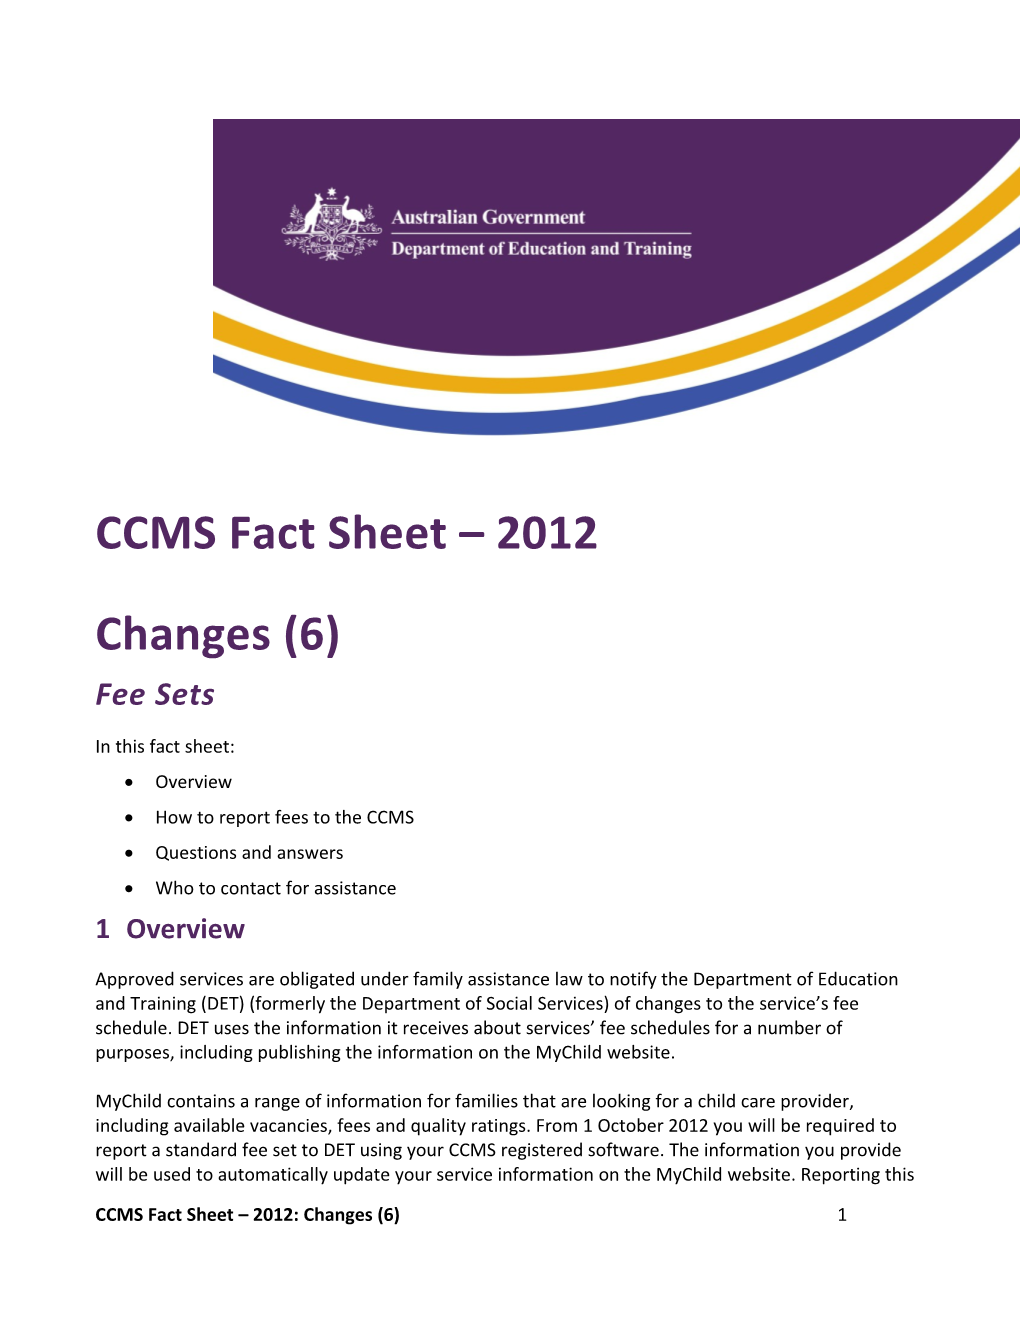 CCMS Fact Sheet 2012: Changes (6)